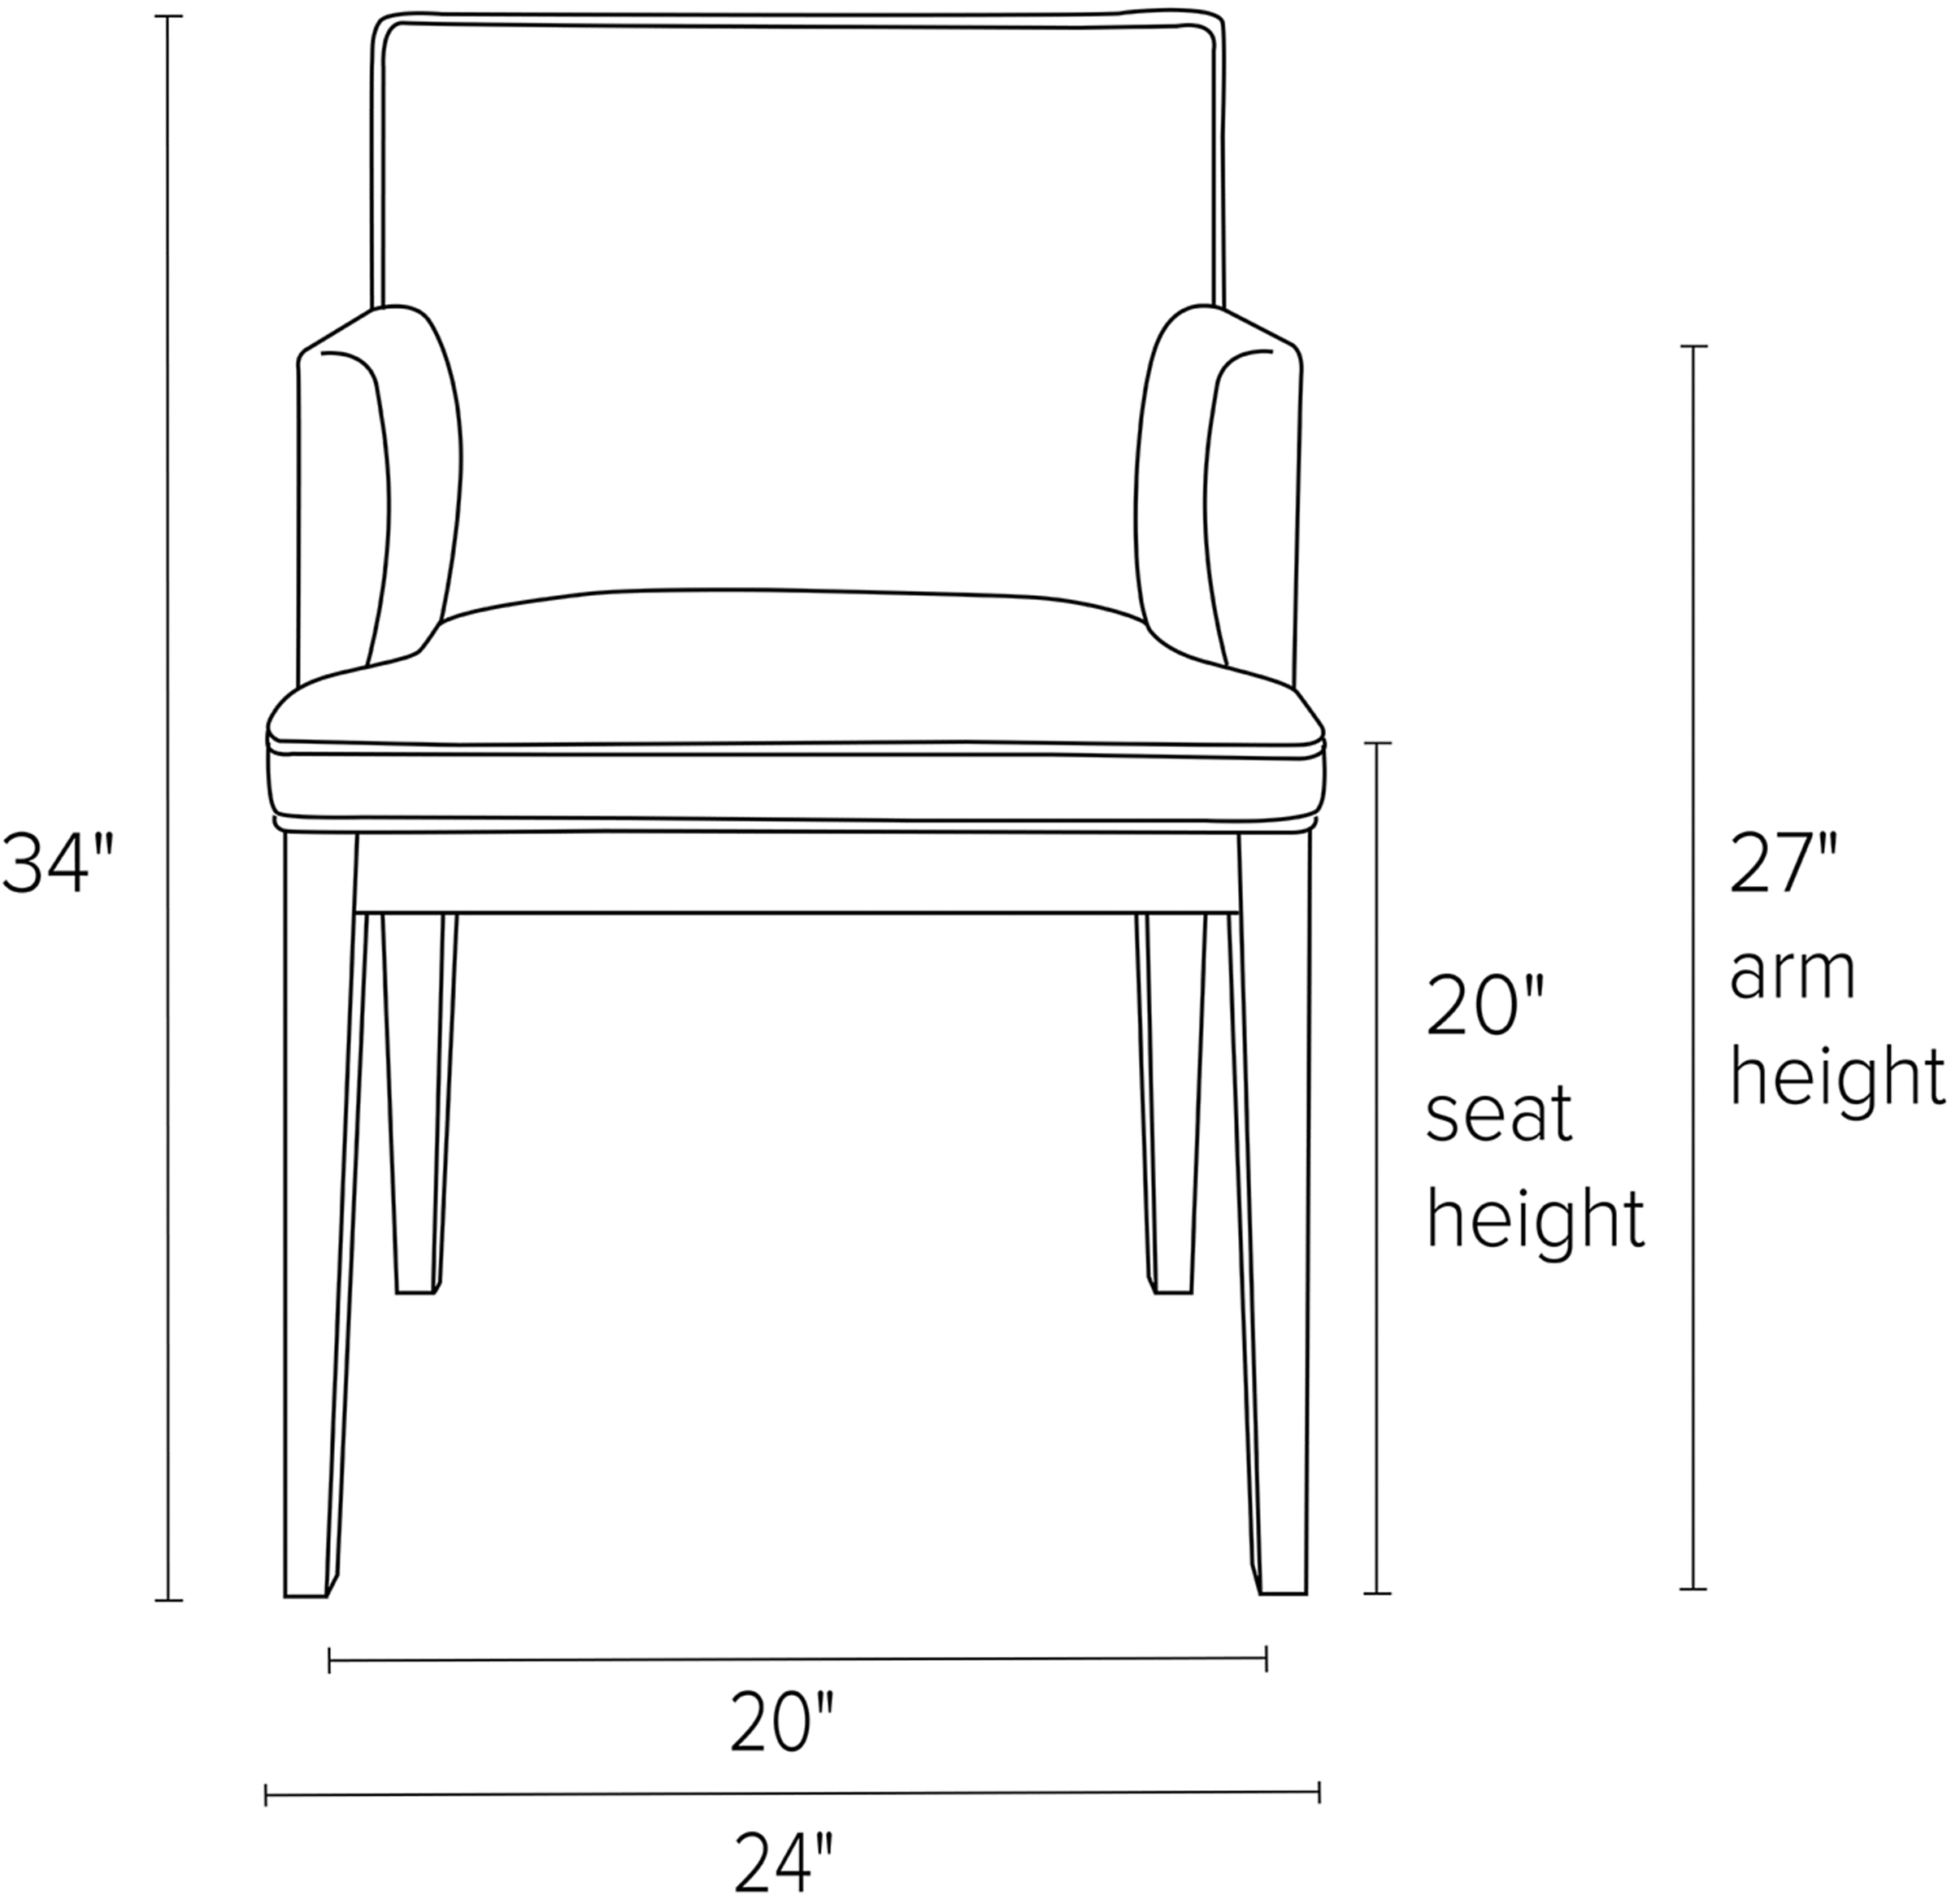 Front view dimension illustration of Ansel arm chair.